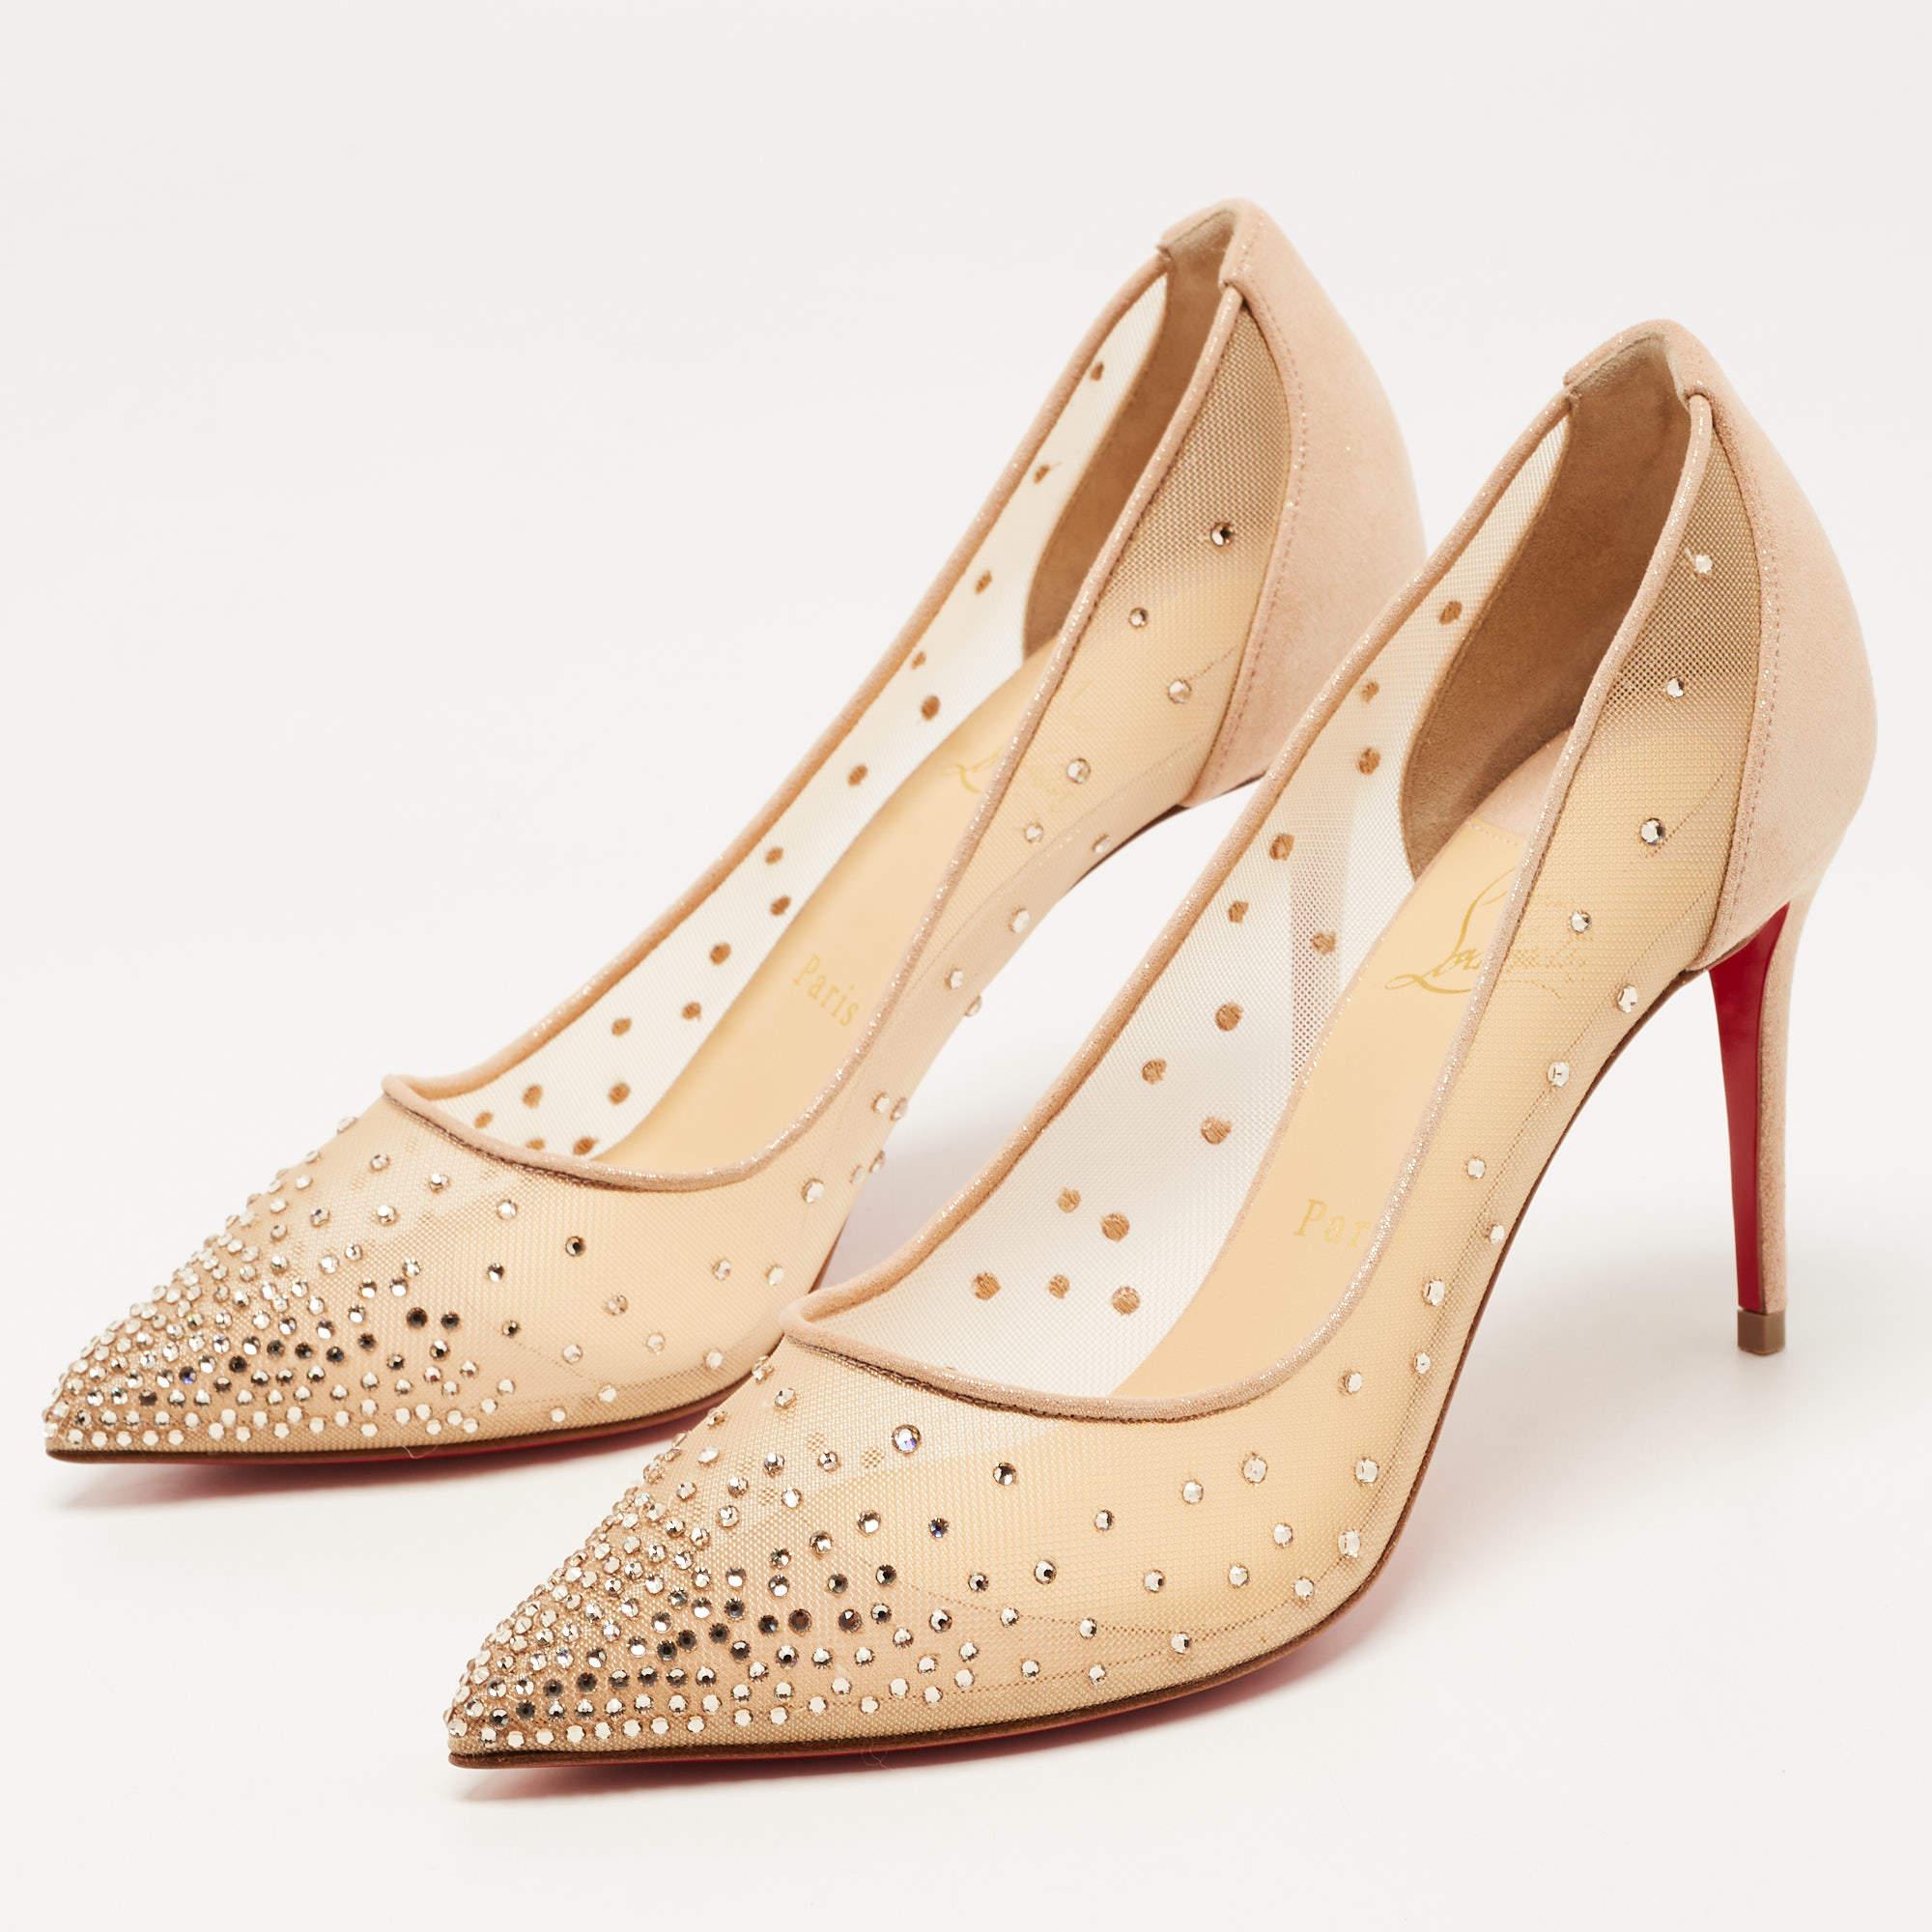 Women's Christian Louboutin Beige Suede Follies Strass Pointed Toe Pumps Size 39